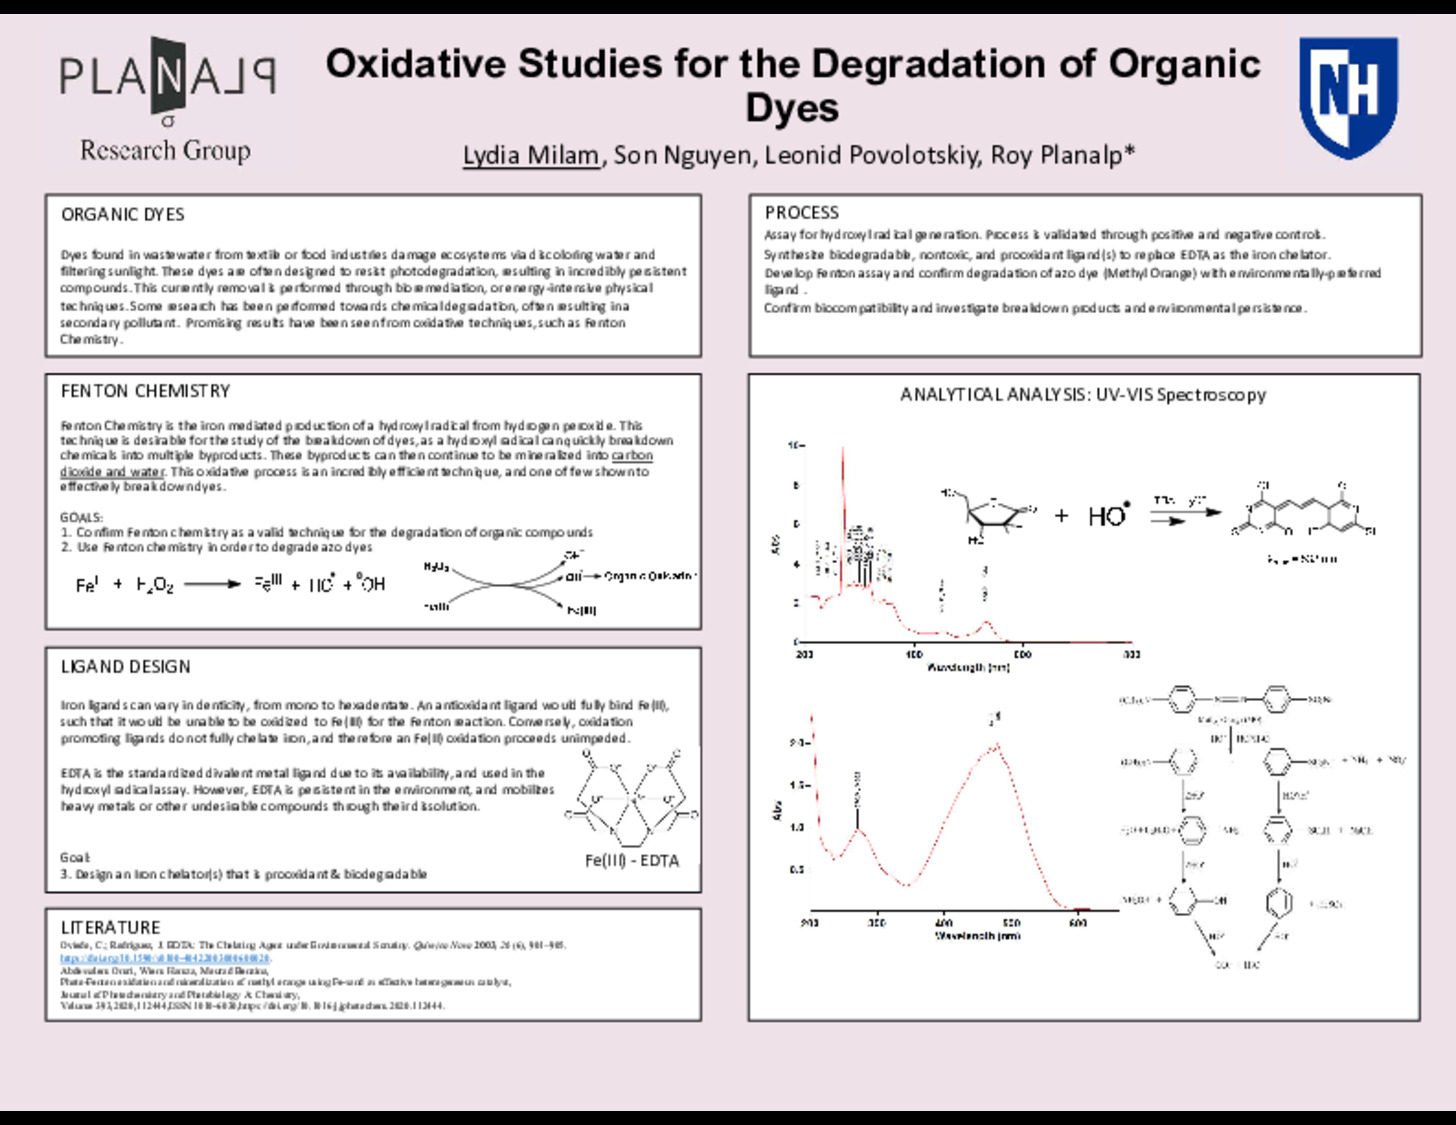 Oxidative Studies For The Degradation Of Organic Dyes by lrm1042